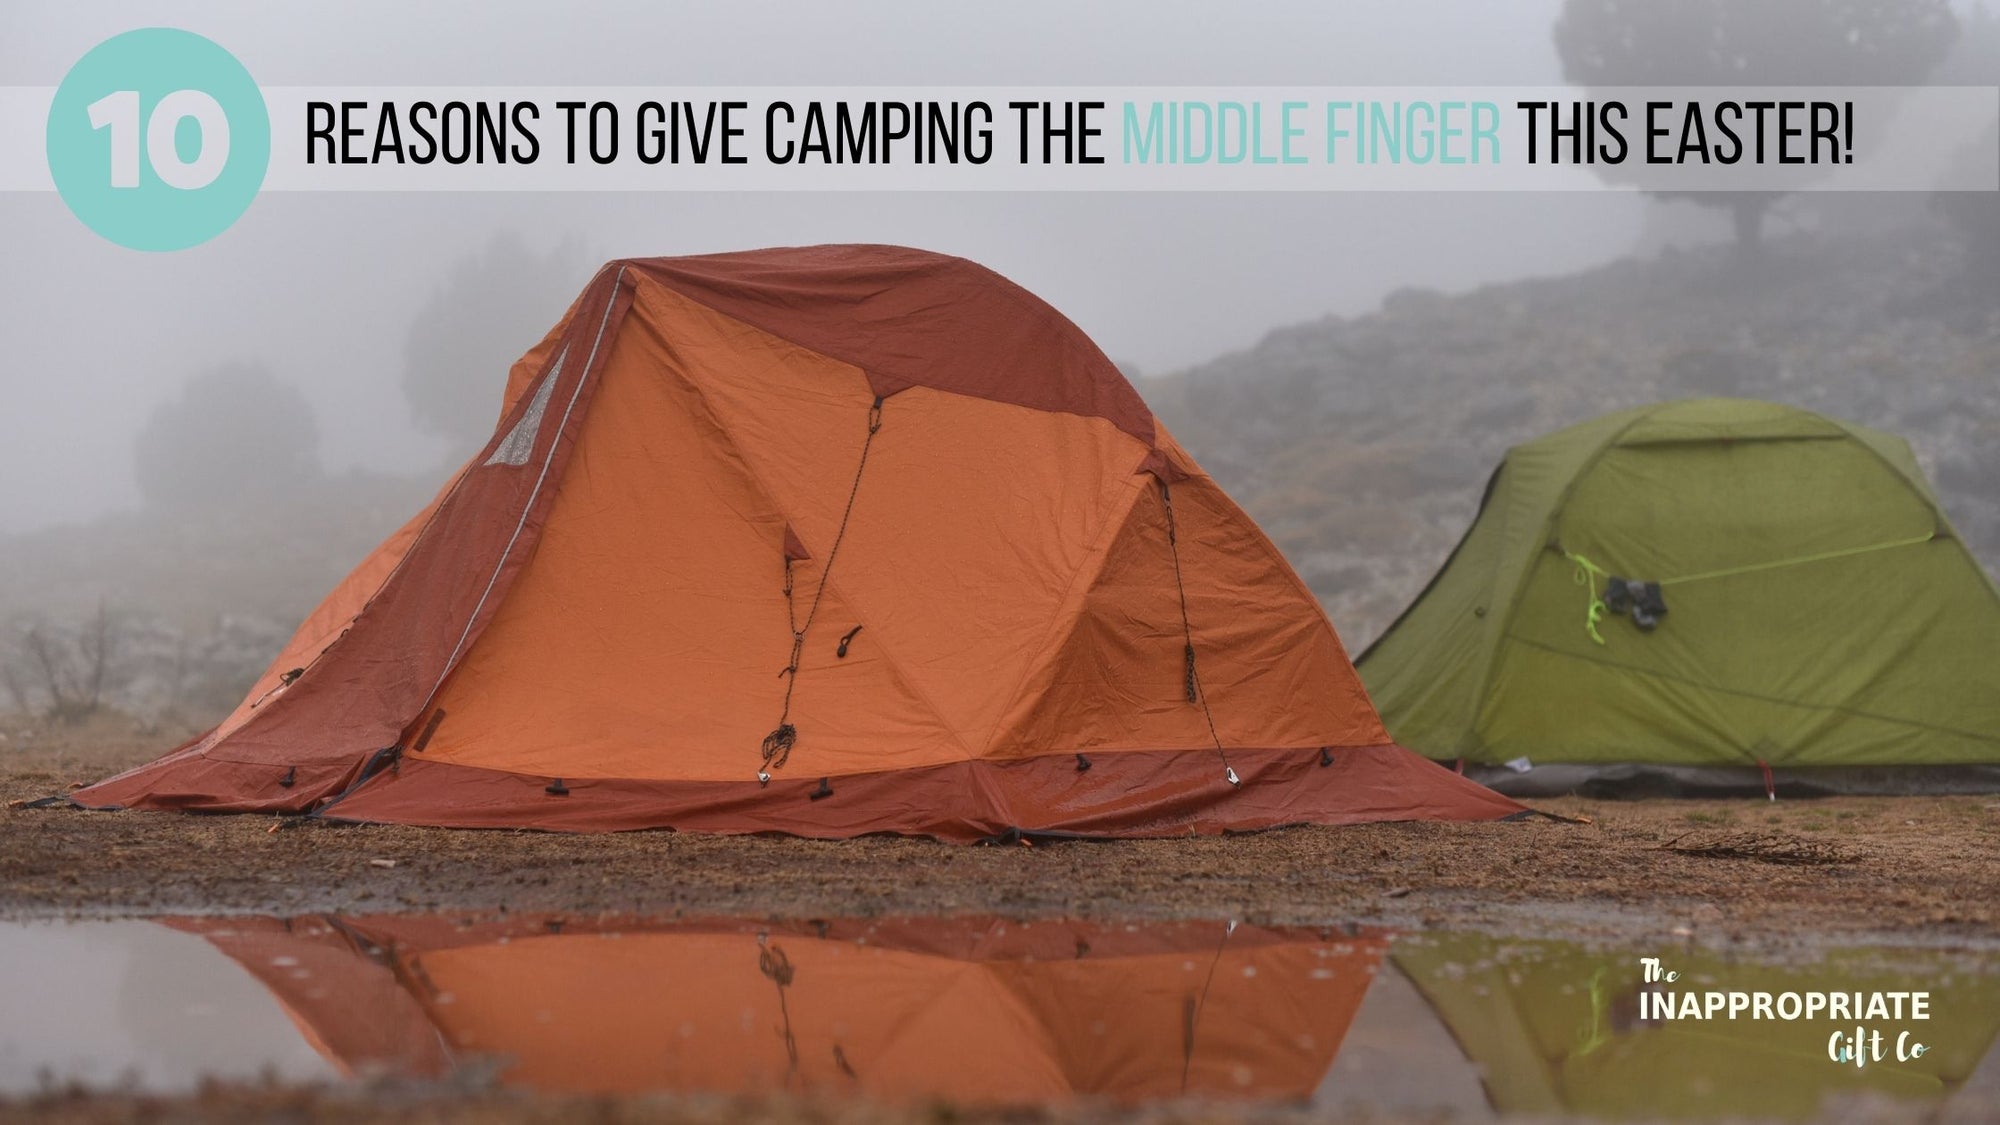 Top 10 Reasons to Give Camping the Middle Finger this Easter